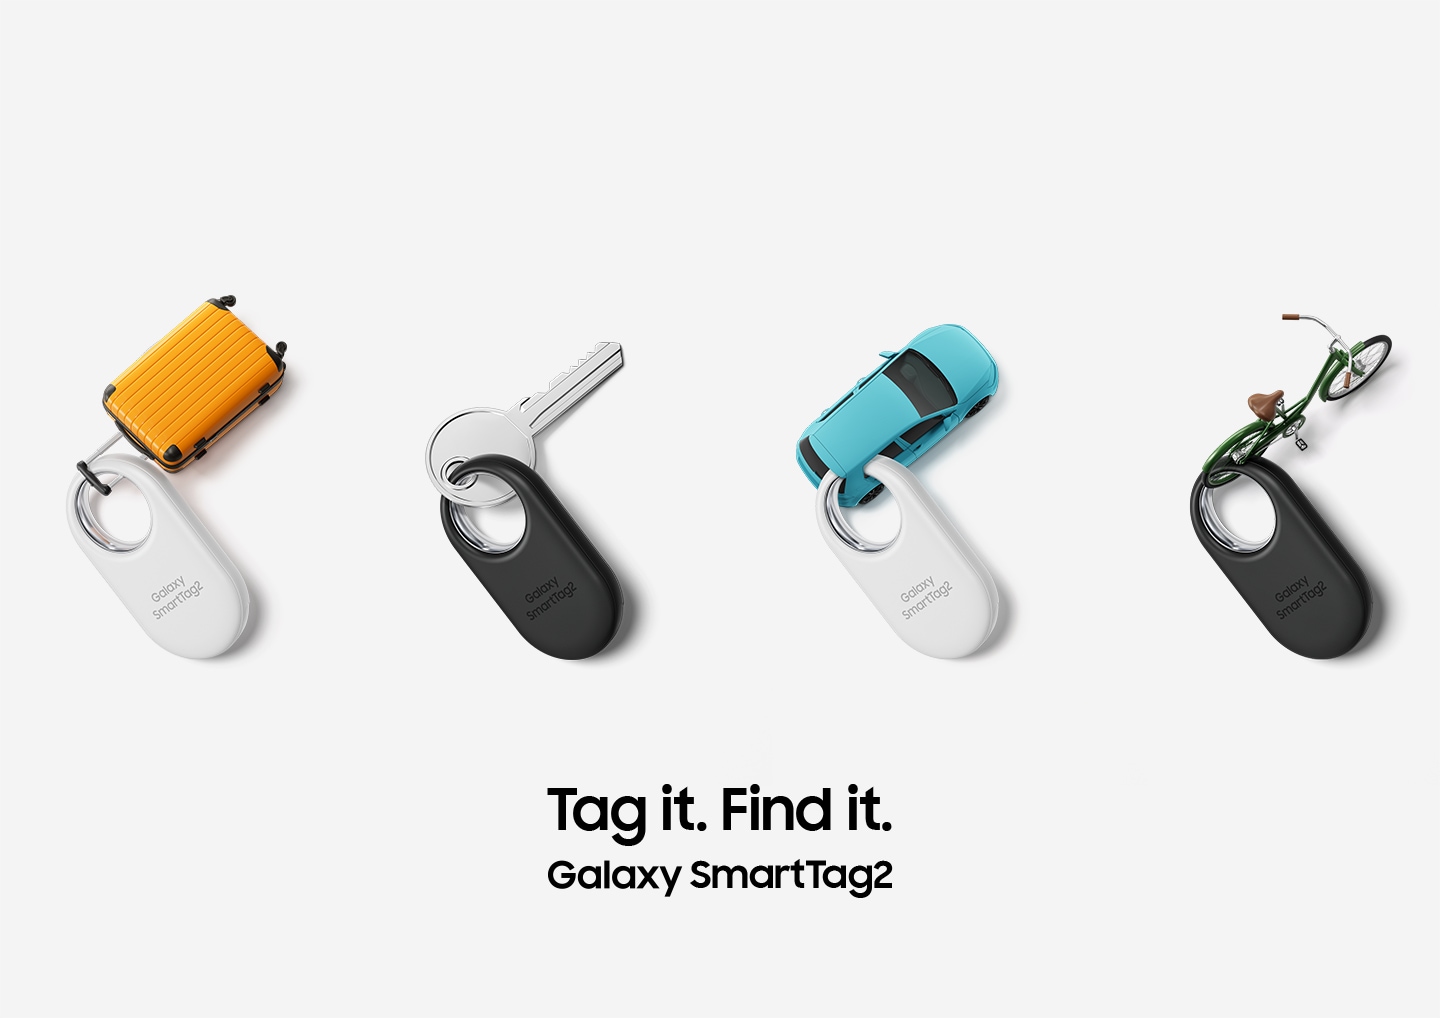 Four Galaxy SmartTag2 devices, two in white and two in black, are neatly placed. The devices are tagged to the following items: A miniature suitcase, a key, a miniature car, and a miniature bicycle.